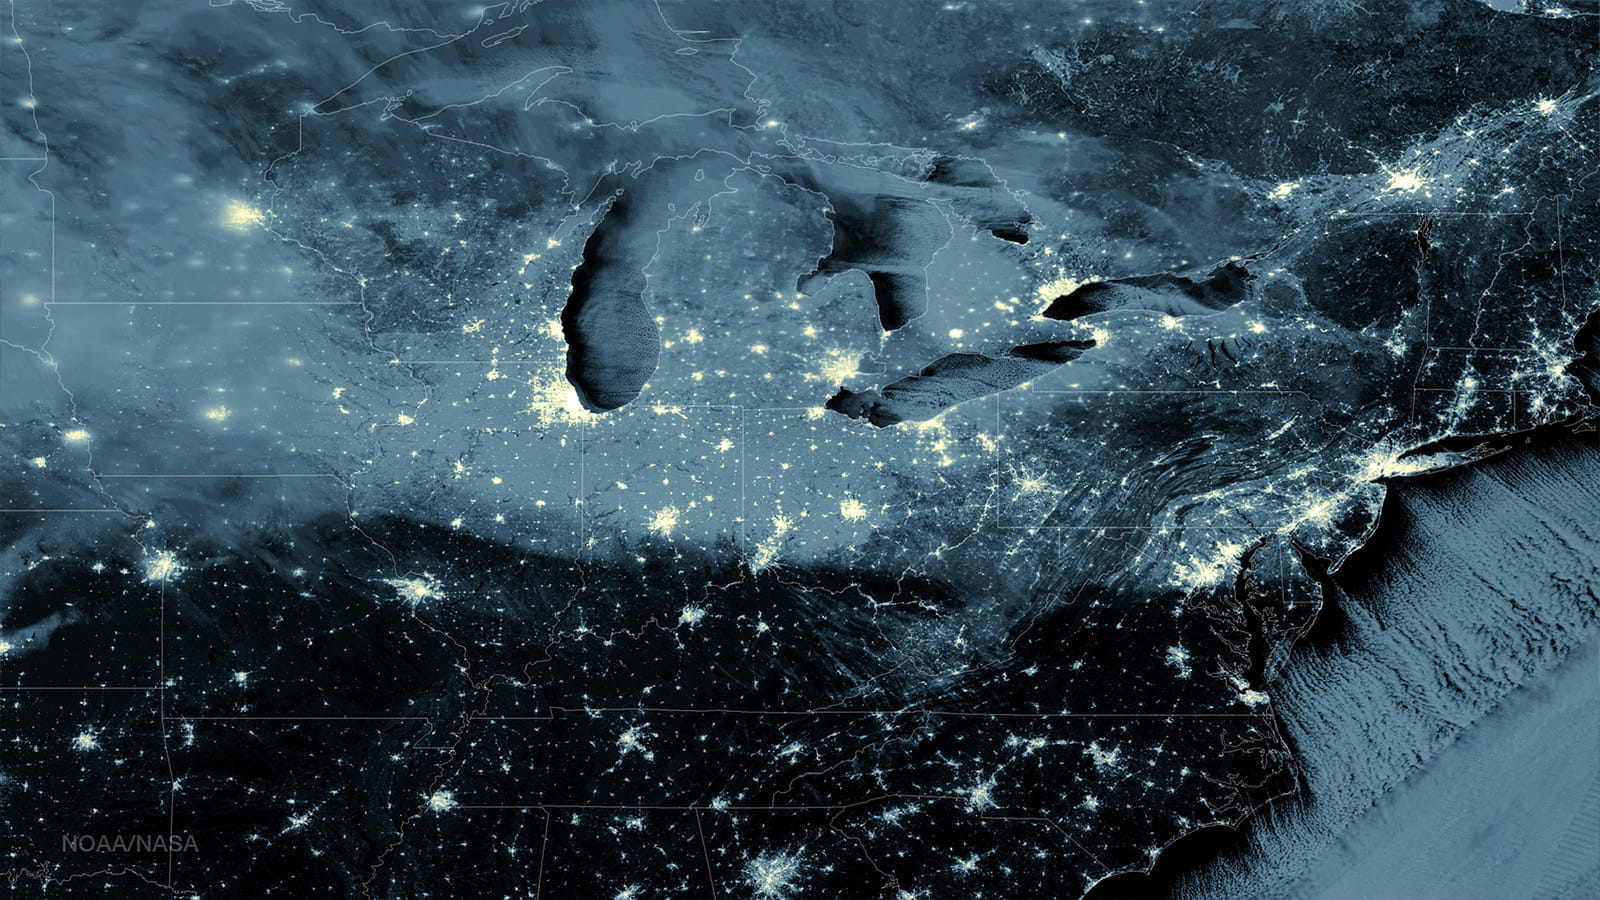 VIIRS’ Day/Night Band captures early morning snowfall across the eastern United States